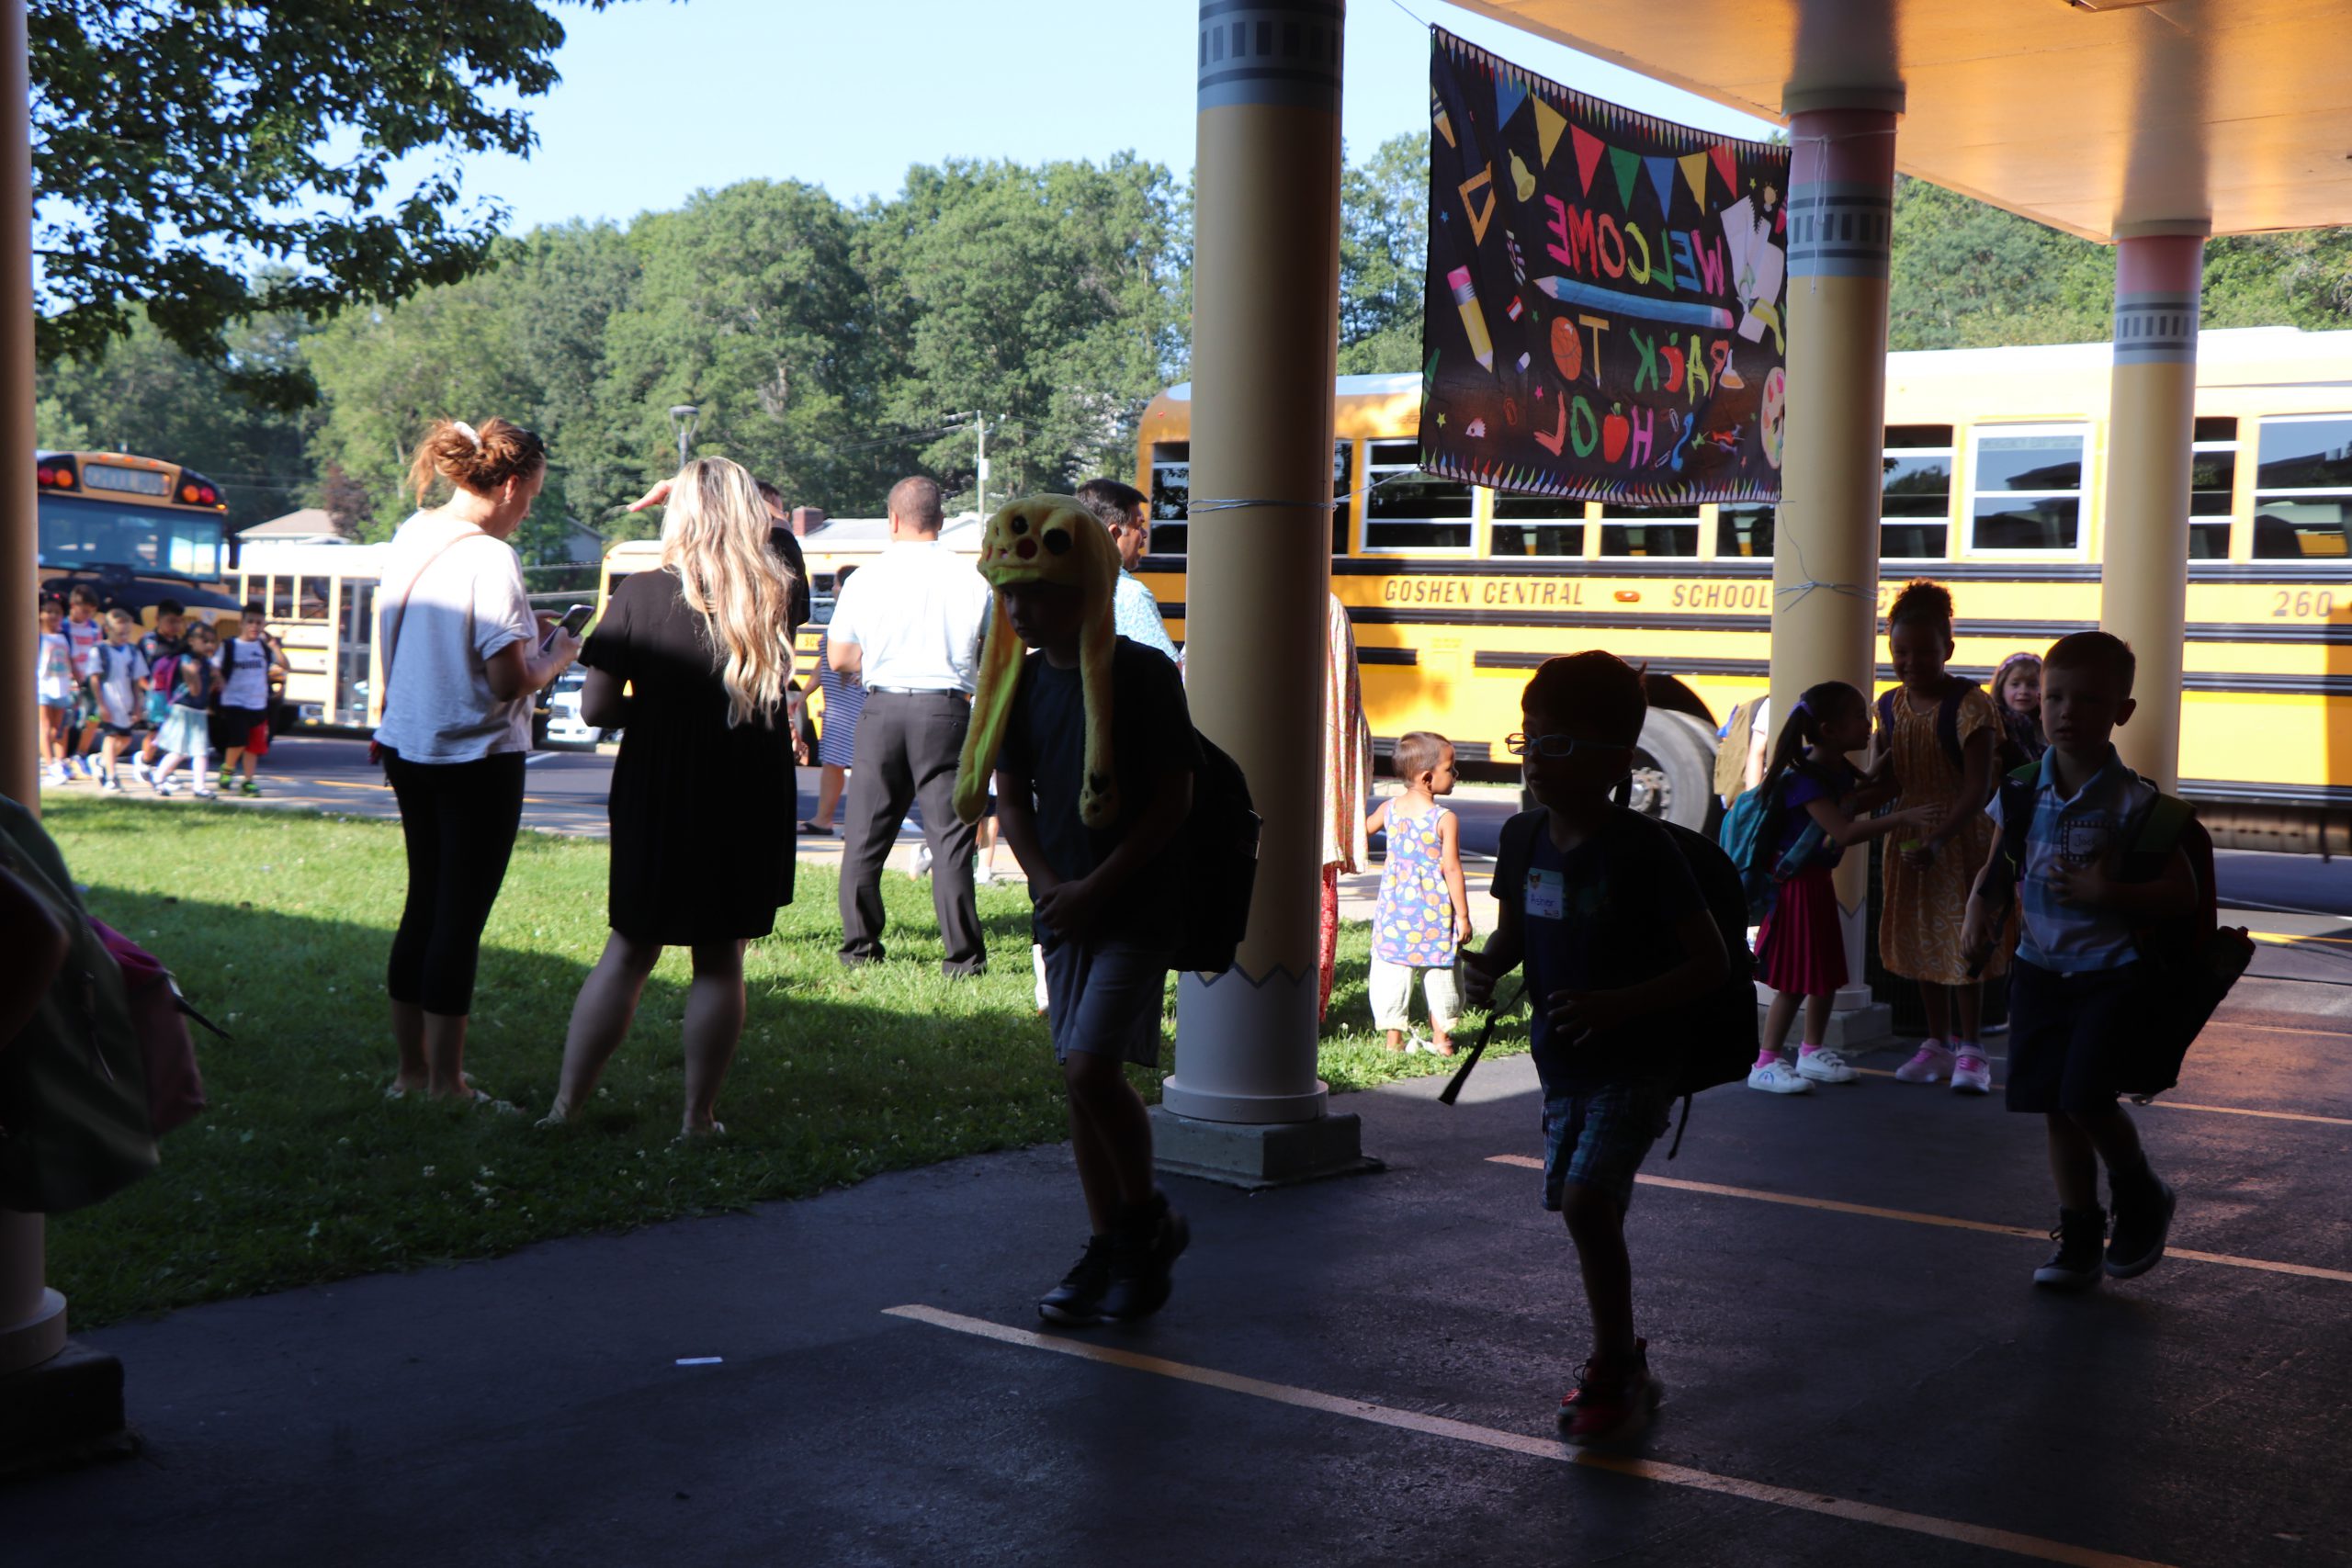 Children with backpacks walk past school buses together.